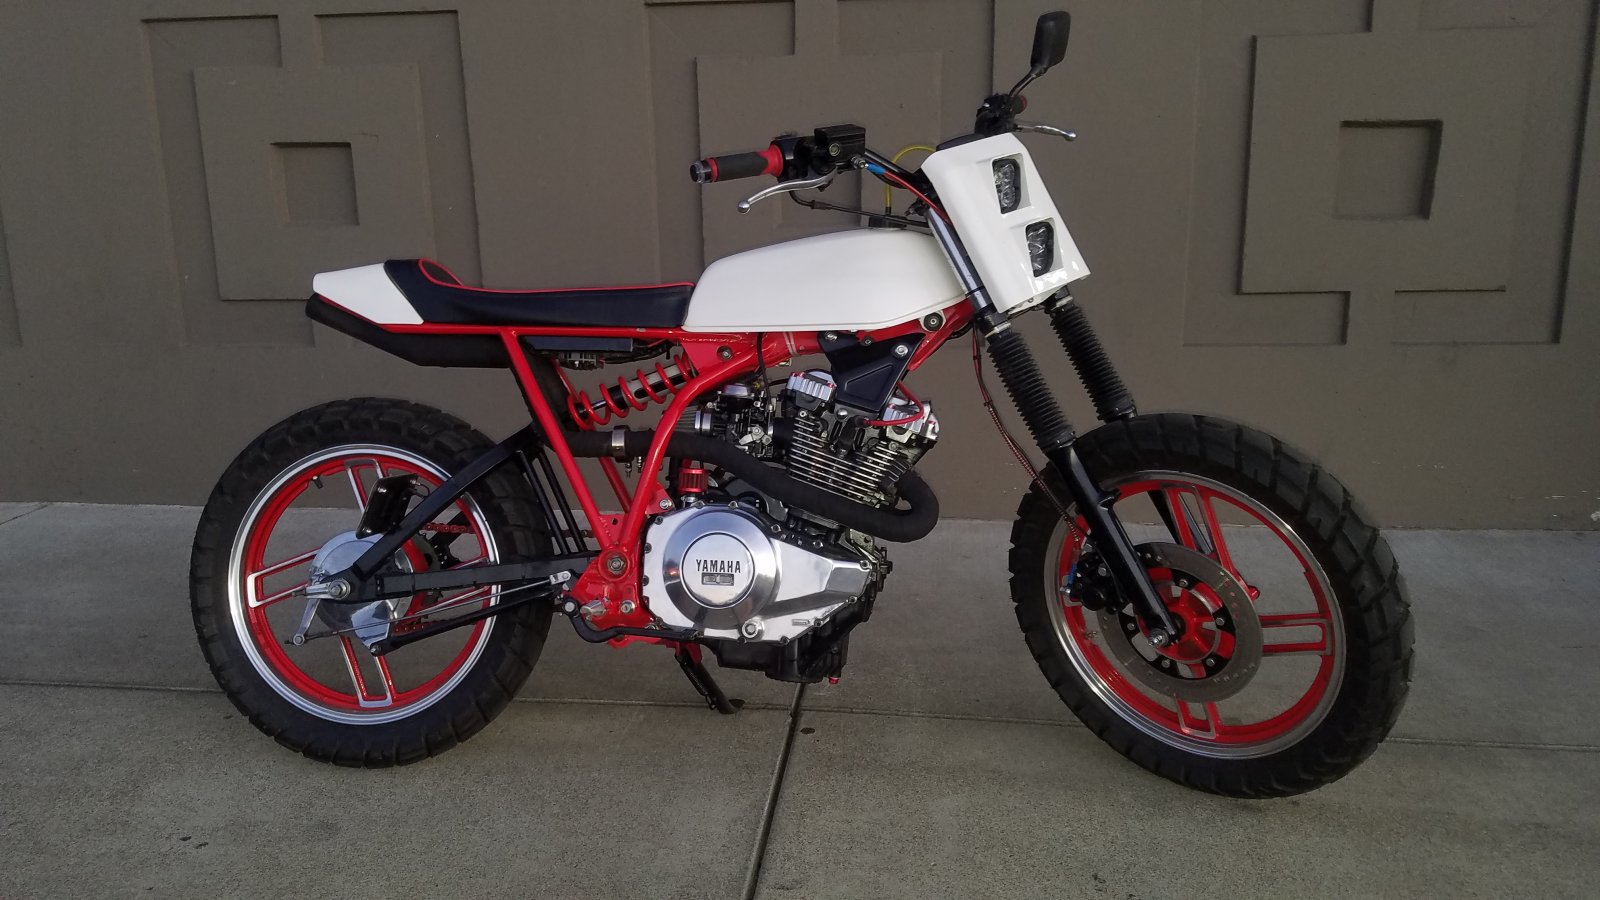 My 400 tracker project.